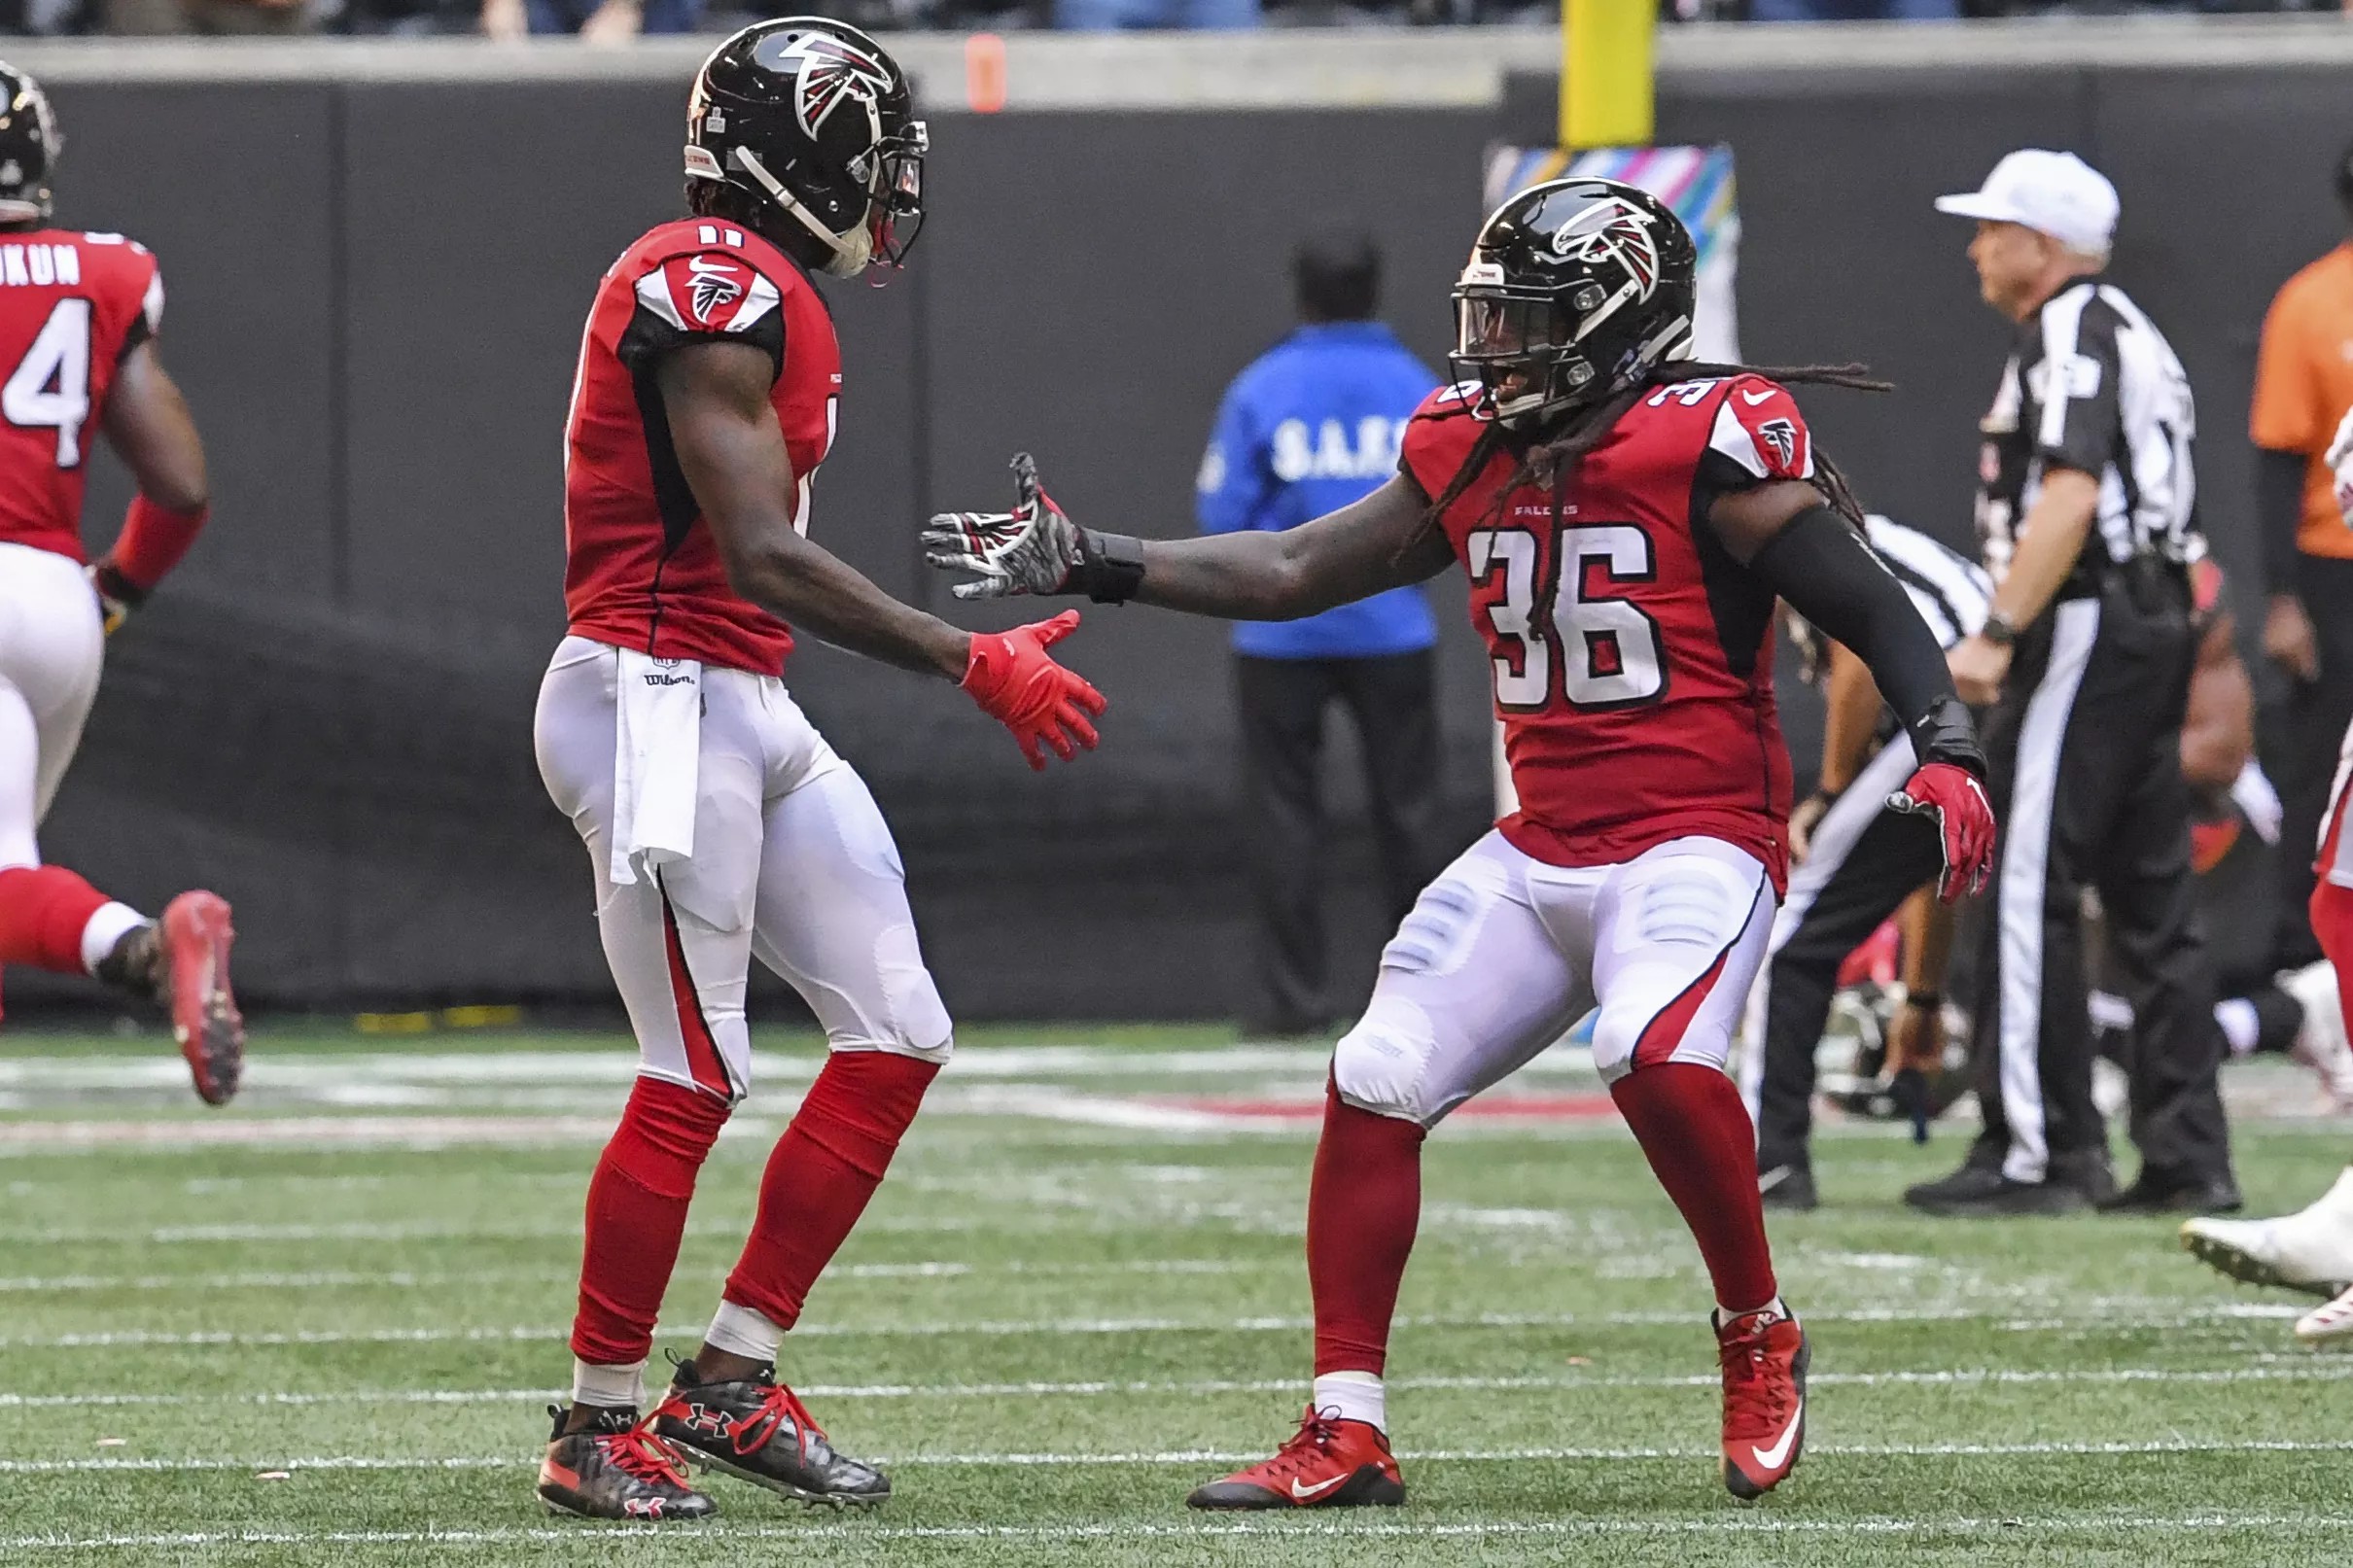 The Falcoholic Postgame Podcast Falcons vs. Bucs, Week 6